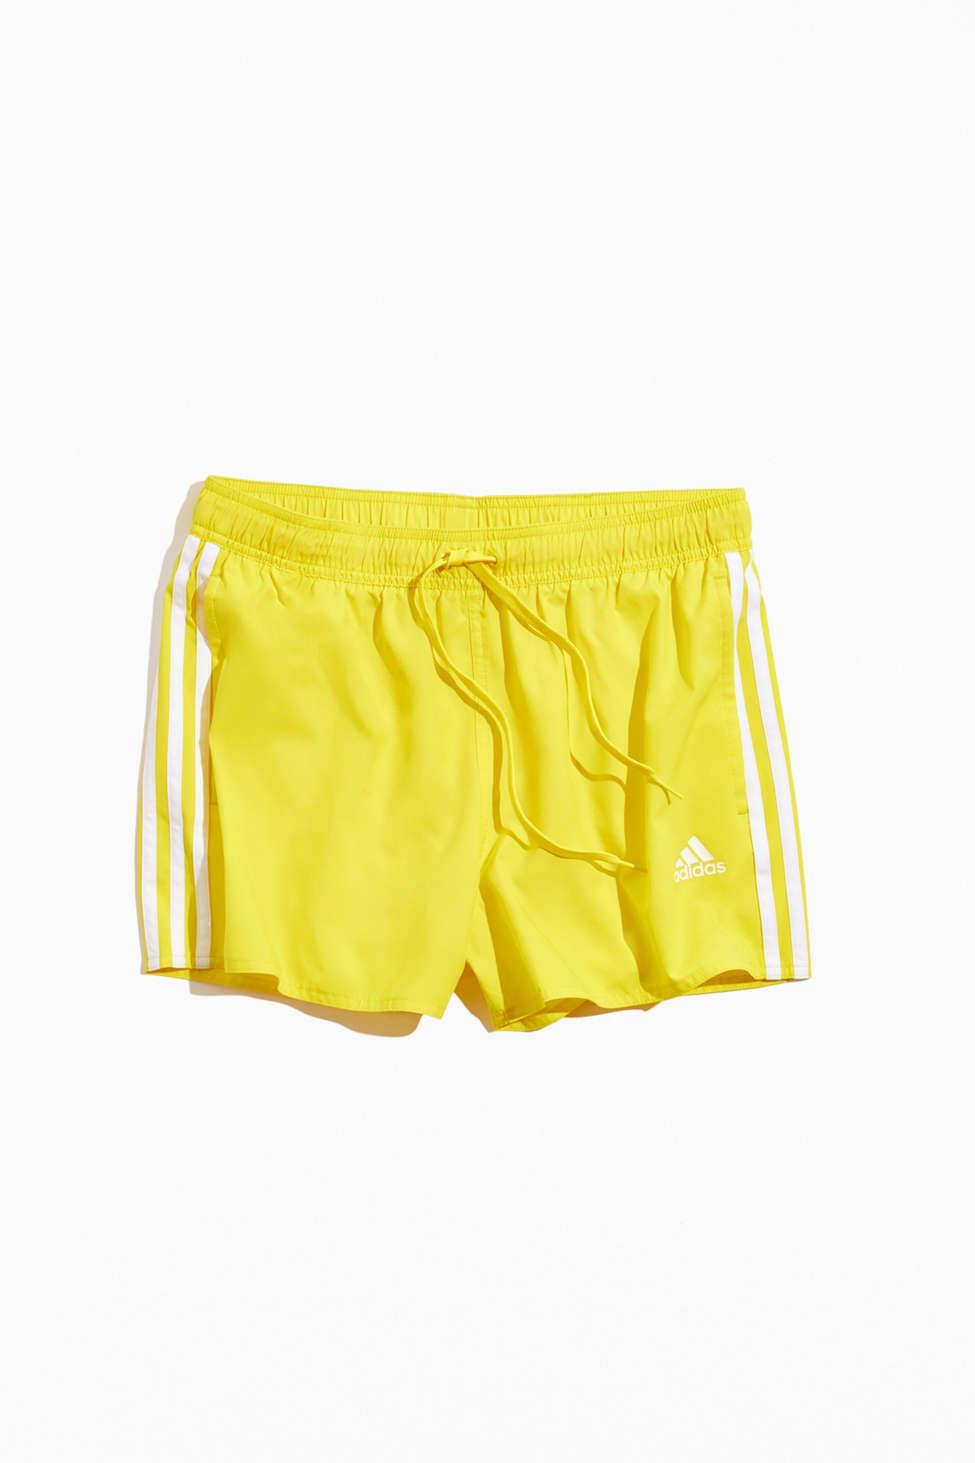 adidas Cxl 3-stripes Short in Yellow for Men - Lyst